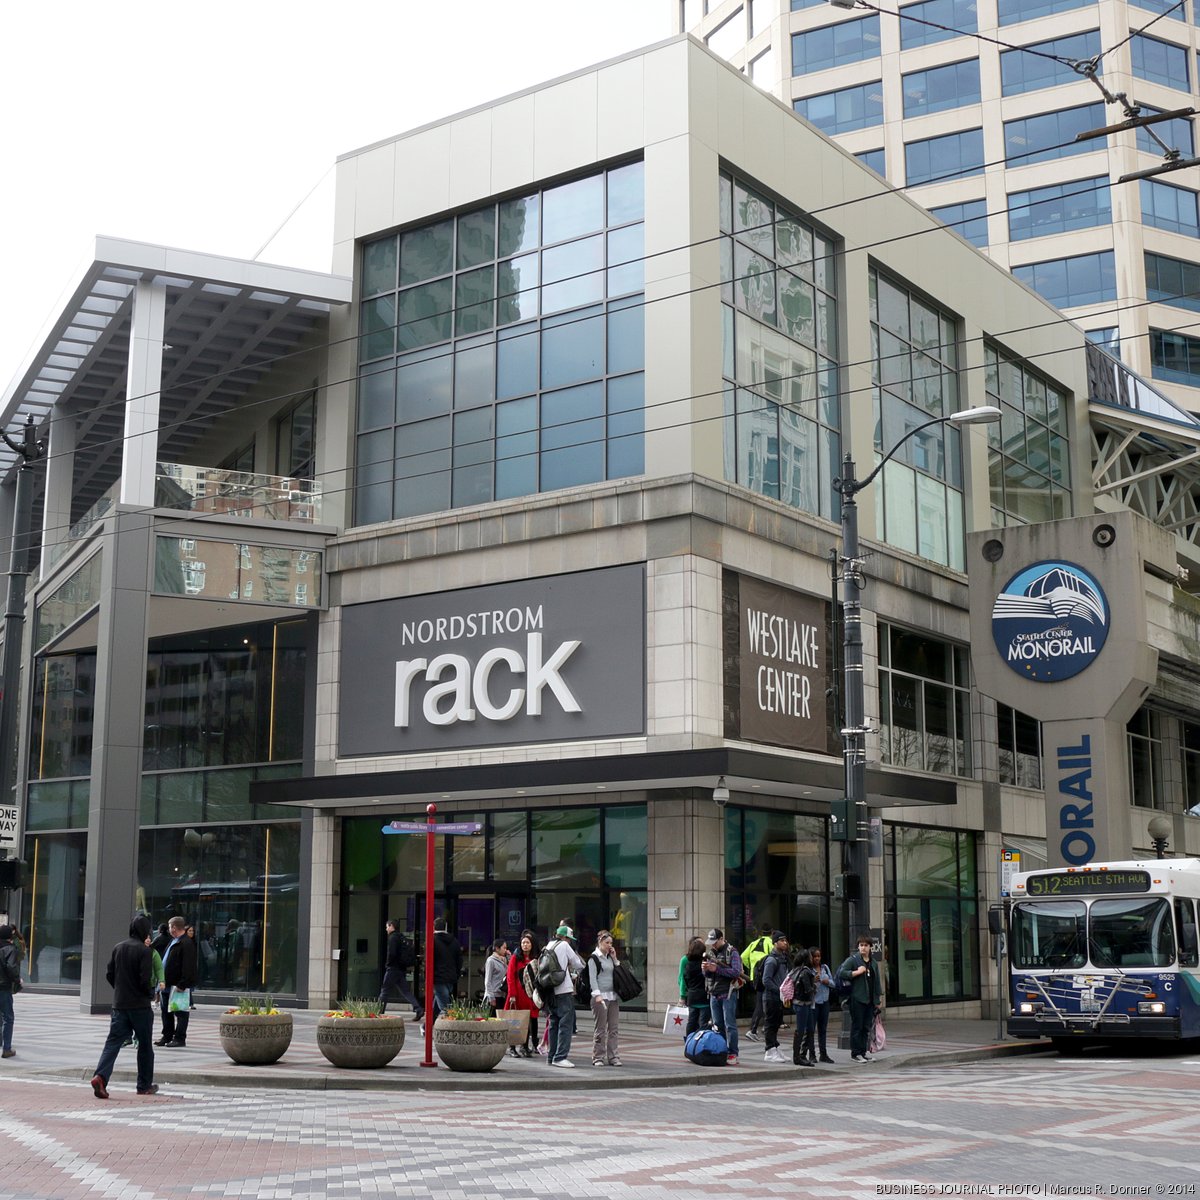 Nordstrom Rack to clairemont square! : r/sandiego